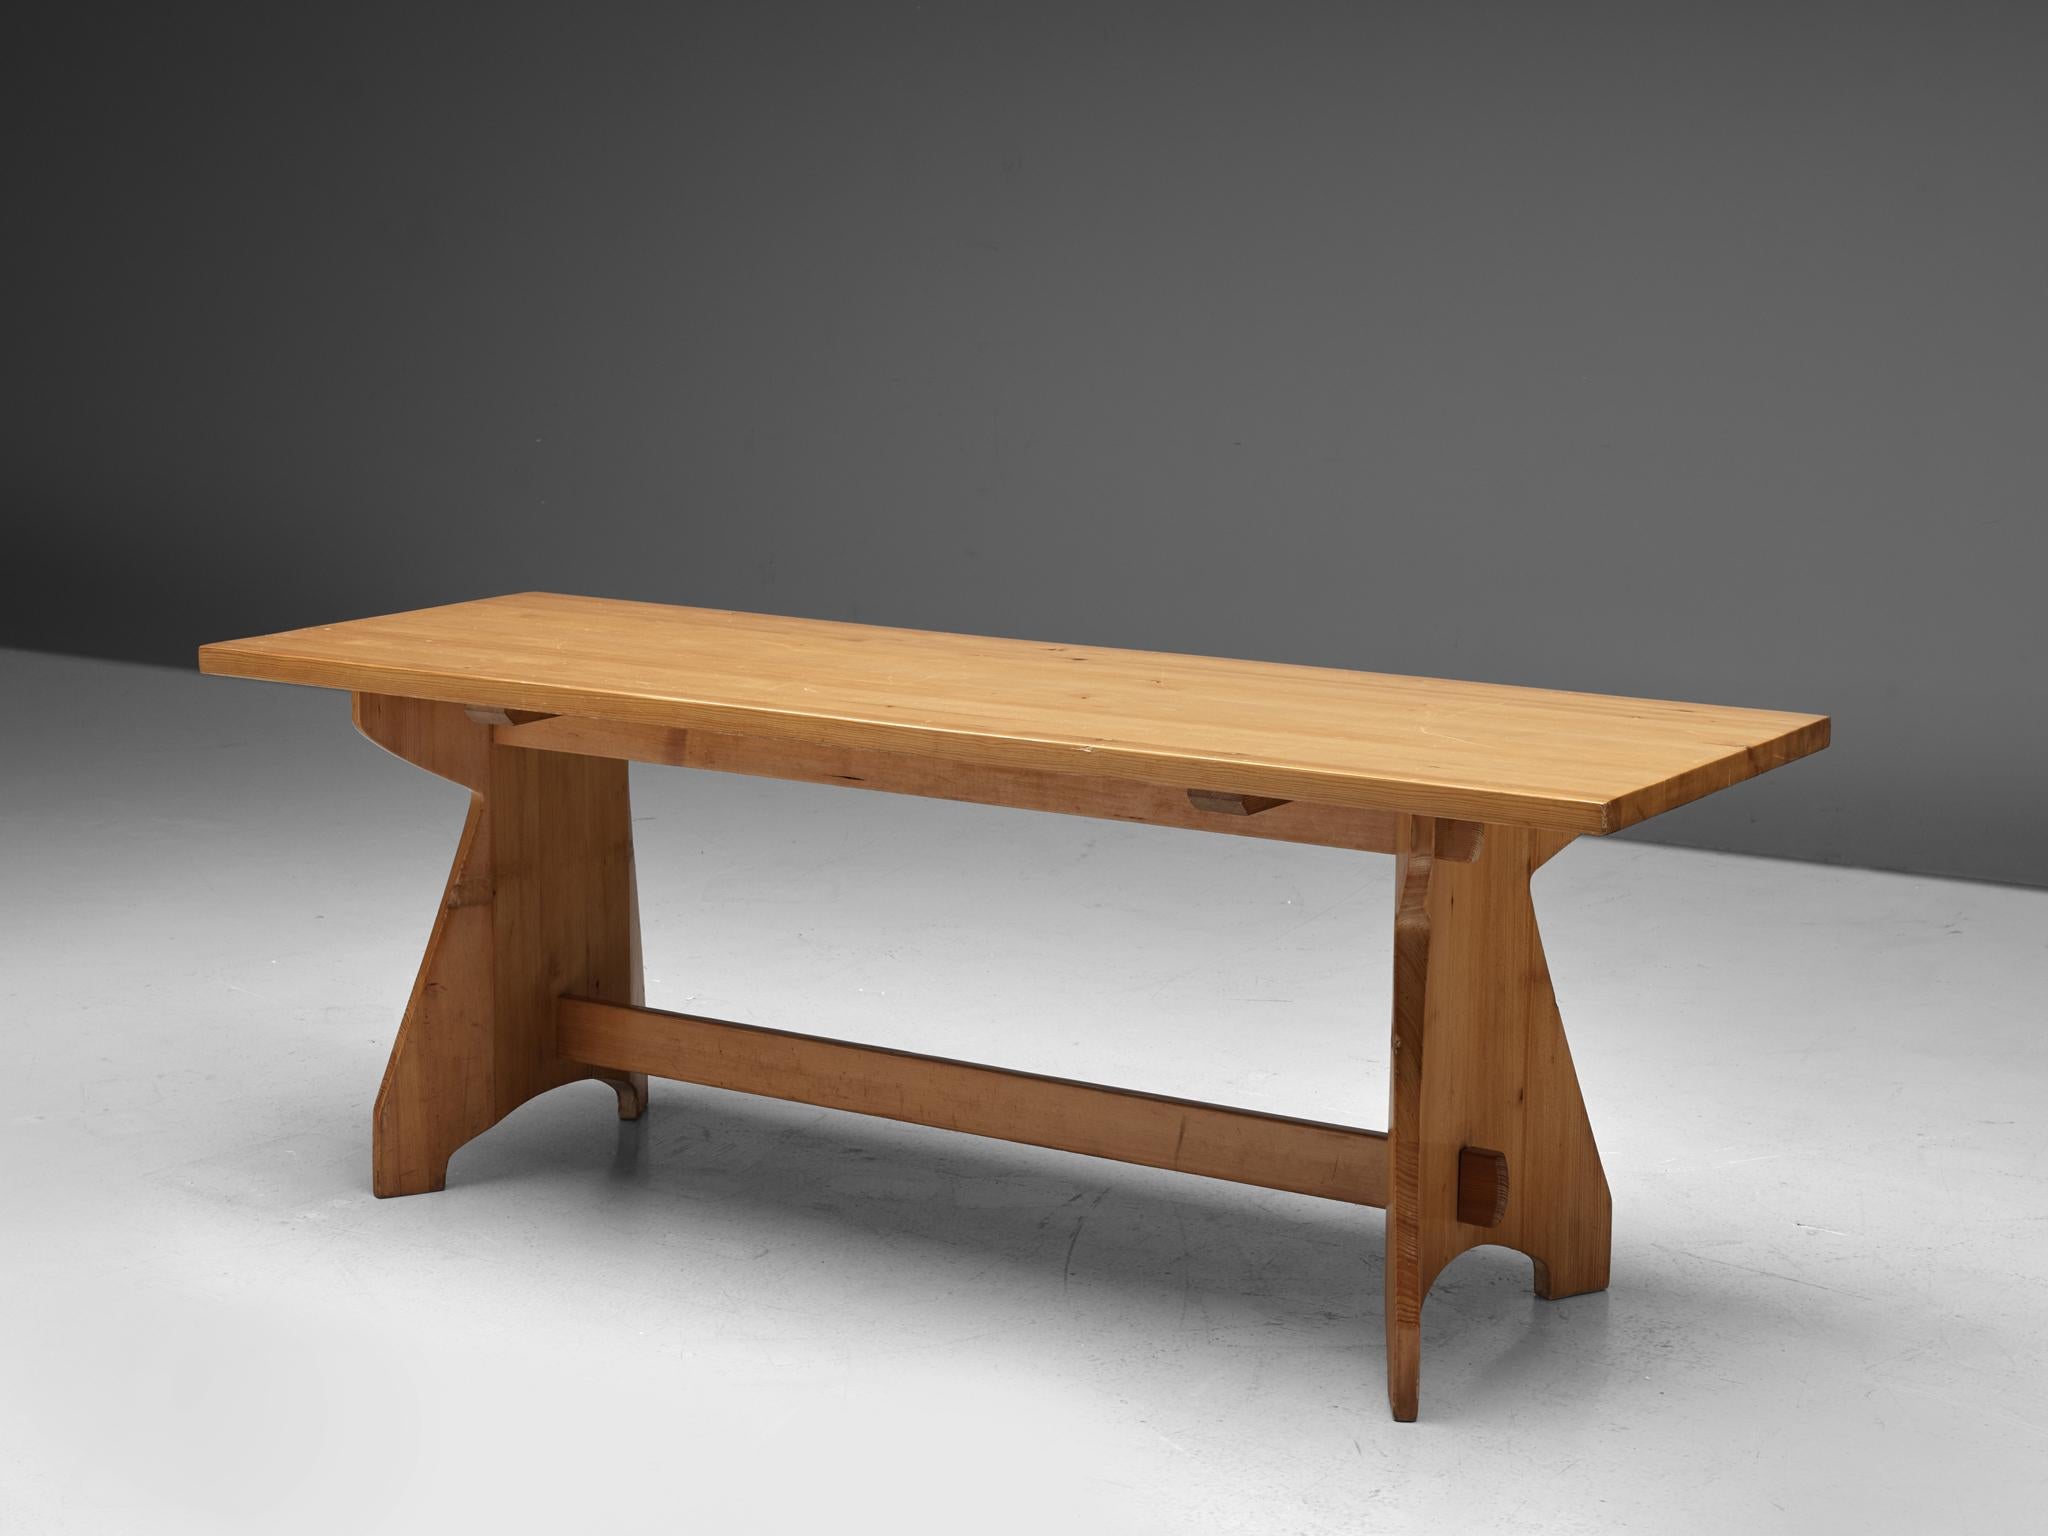 Jacob Kielland-Brandt, dining table, pine, Denmark, 1960s.

Rectangular dining table in solid pinewood. This classical kitchen table shows great craftsmanship, as seen on the wooden joints. The pinewood shows a nice warm grain, which can only be